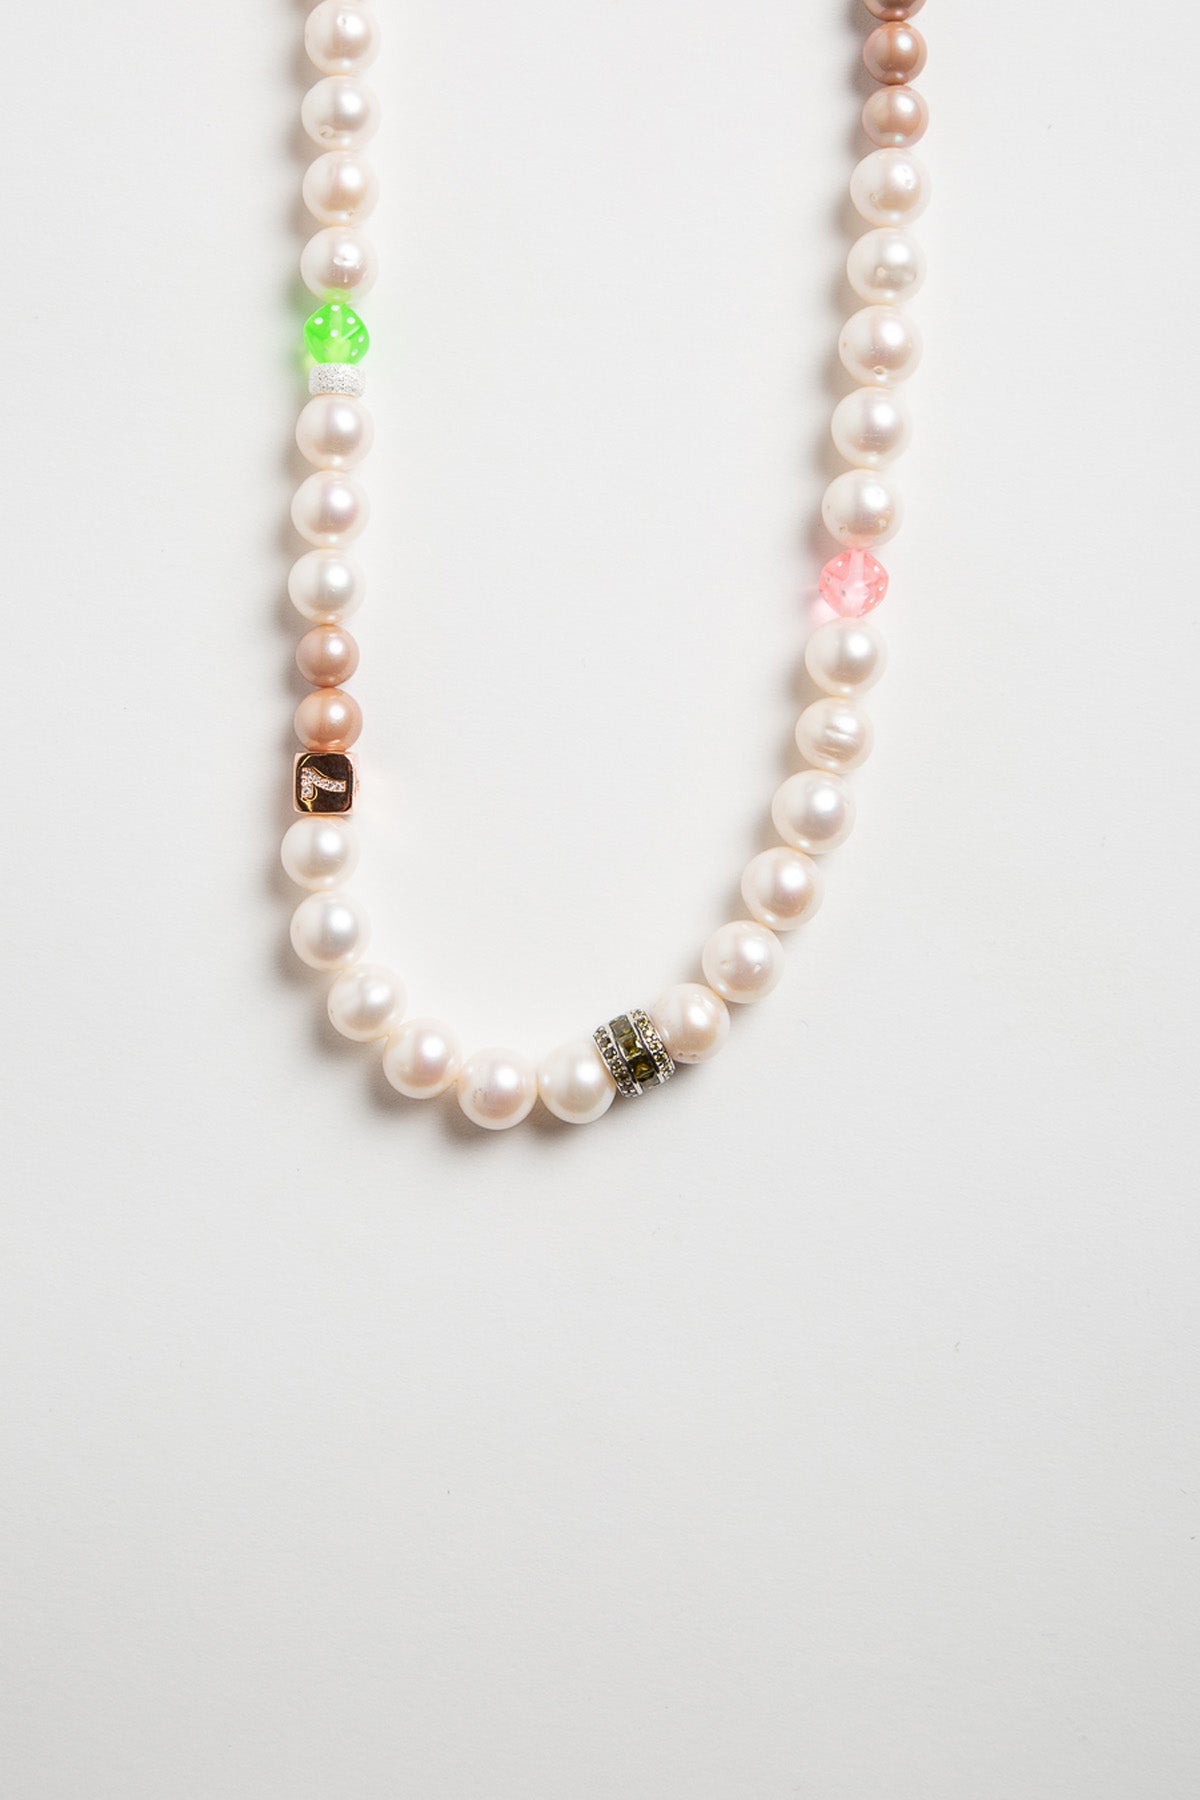 South Sea Mixed Pearls Strand Necklace - Bopies Diamonds & Fine Jewelry